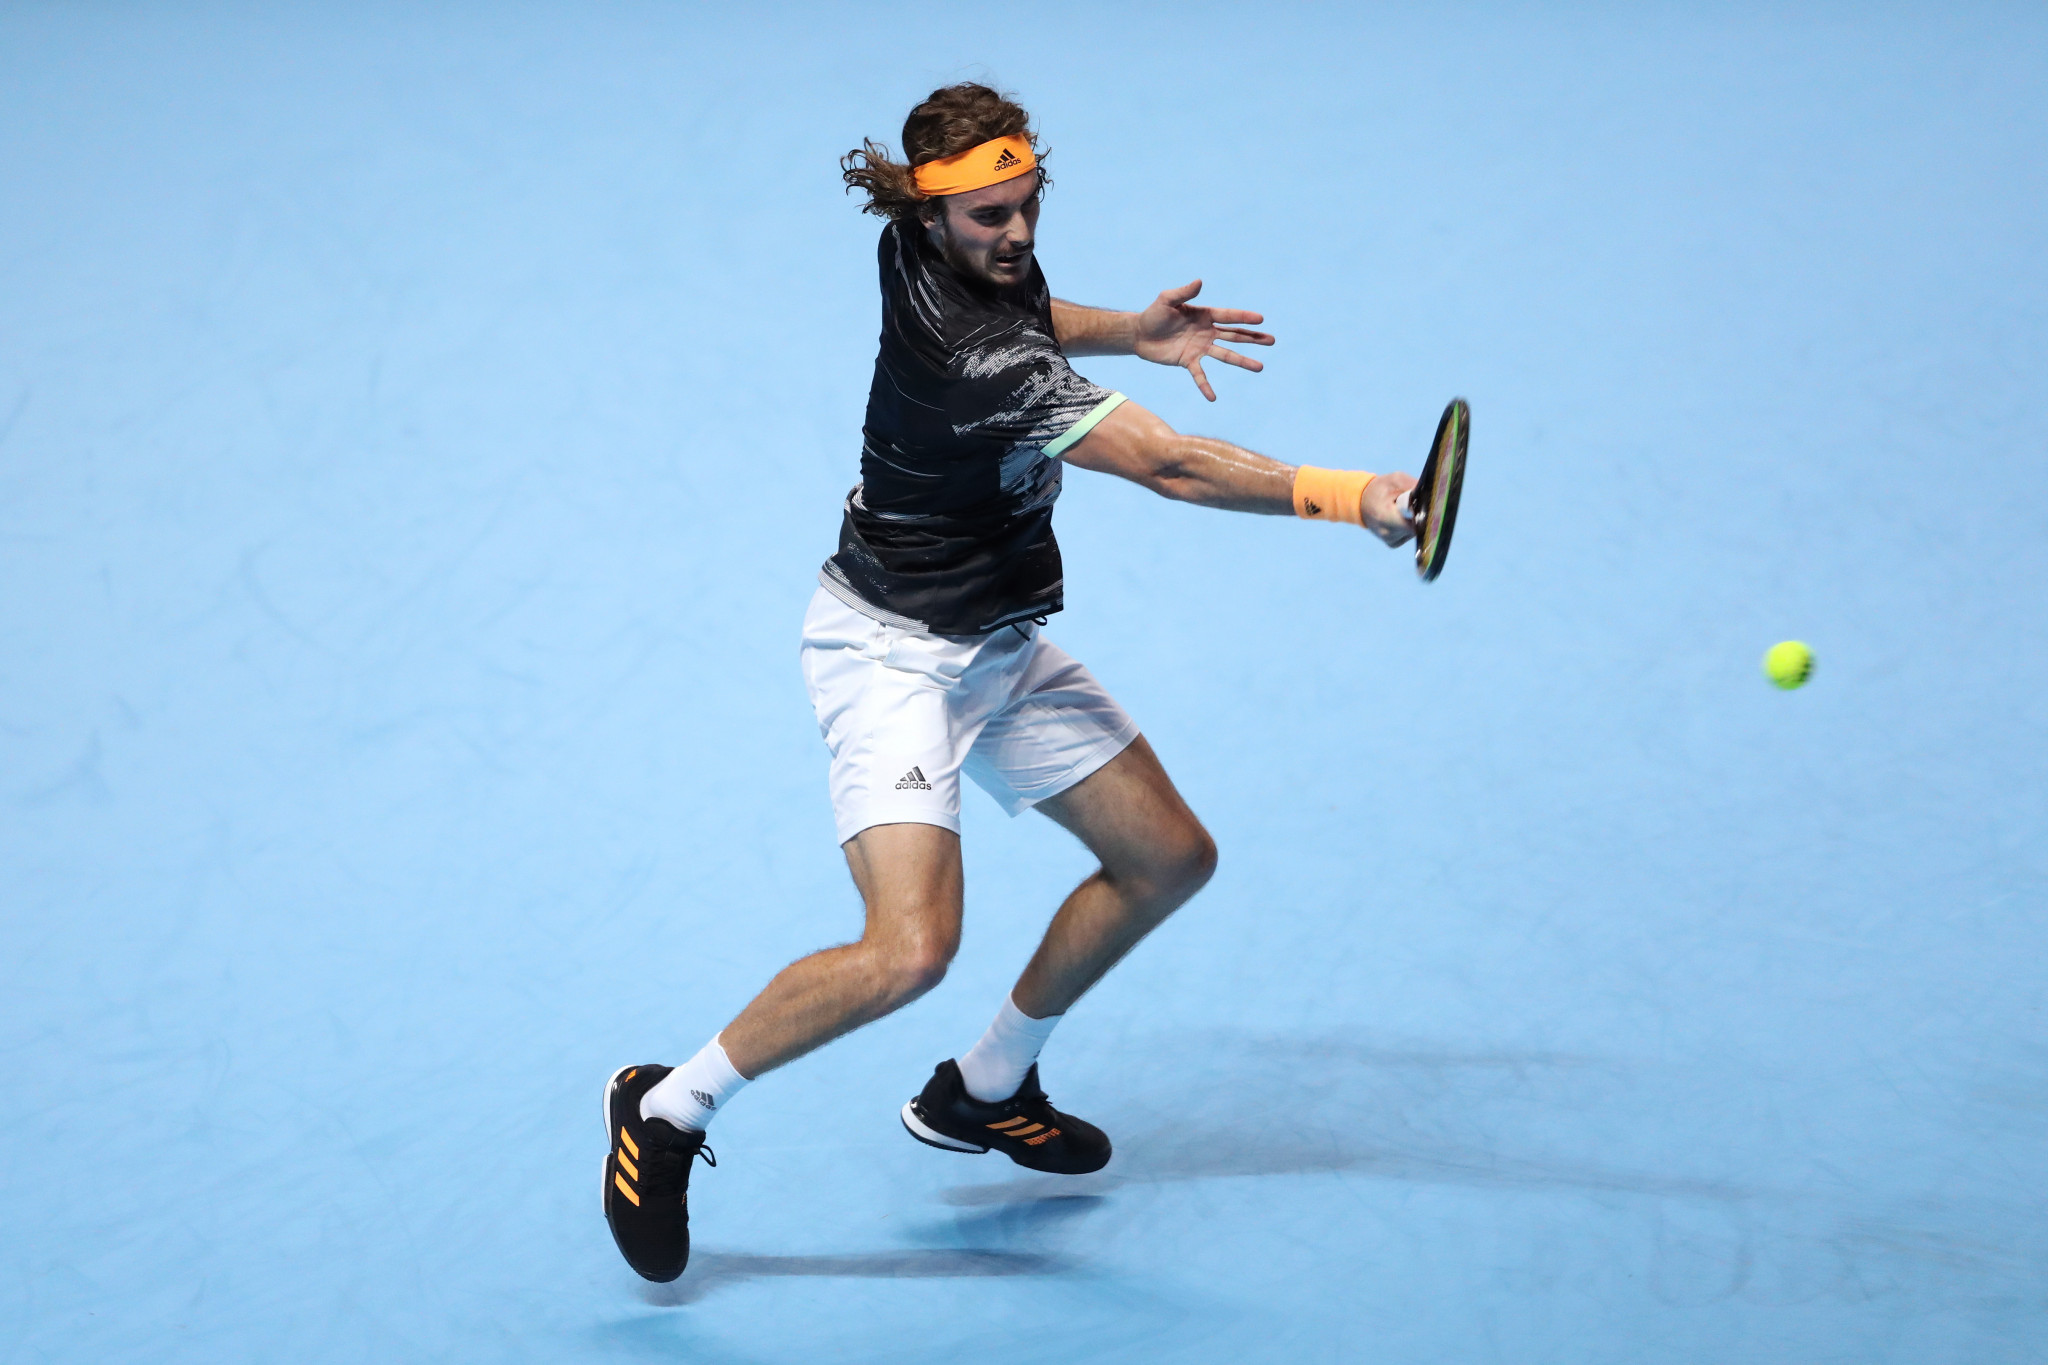 Greece's Stefanos Tsitsipas made it two wins out of two by beating defending champion Alexander Zverev of Germany ©Getty Images